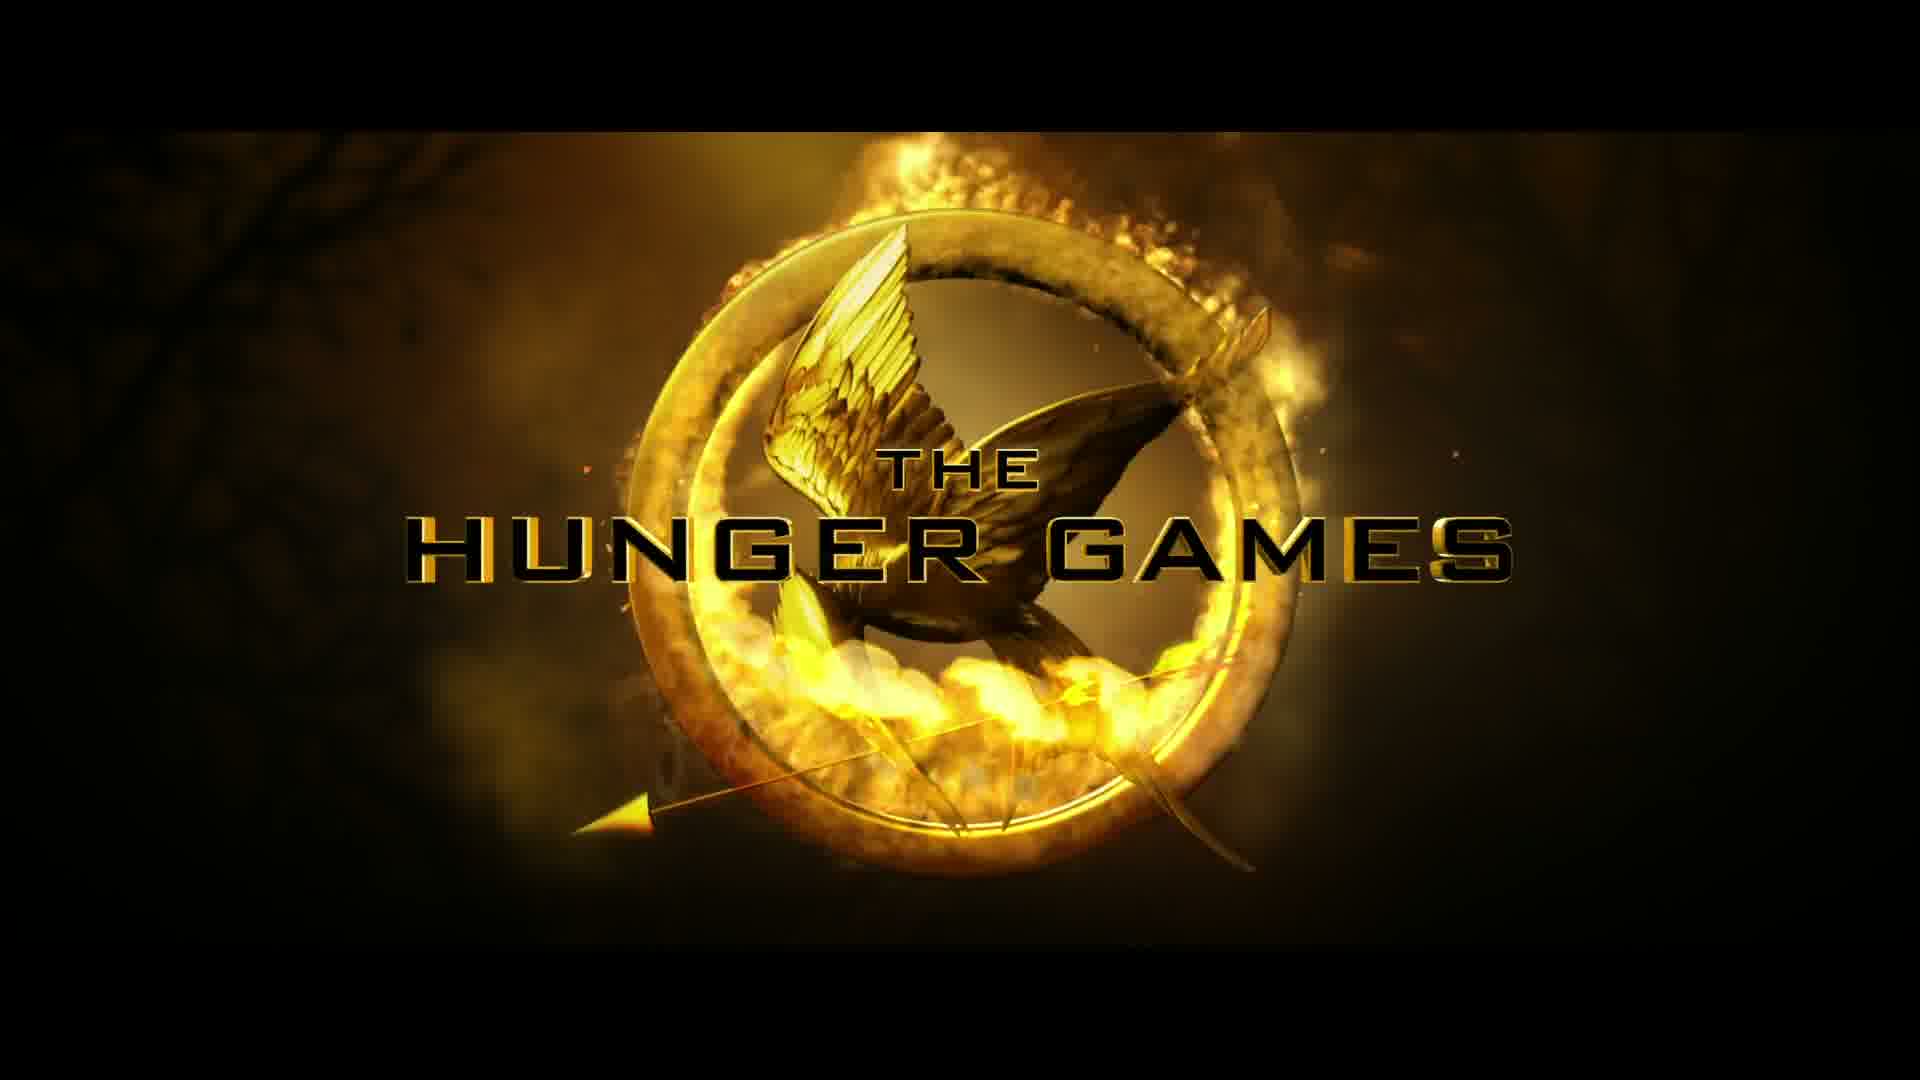 The Hunger Games Movie images The Hunger Games trailer